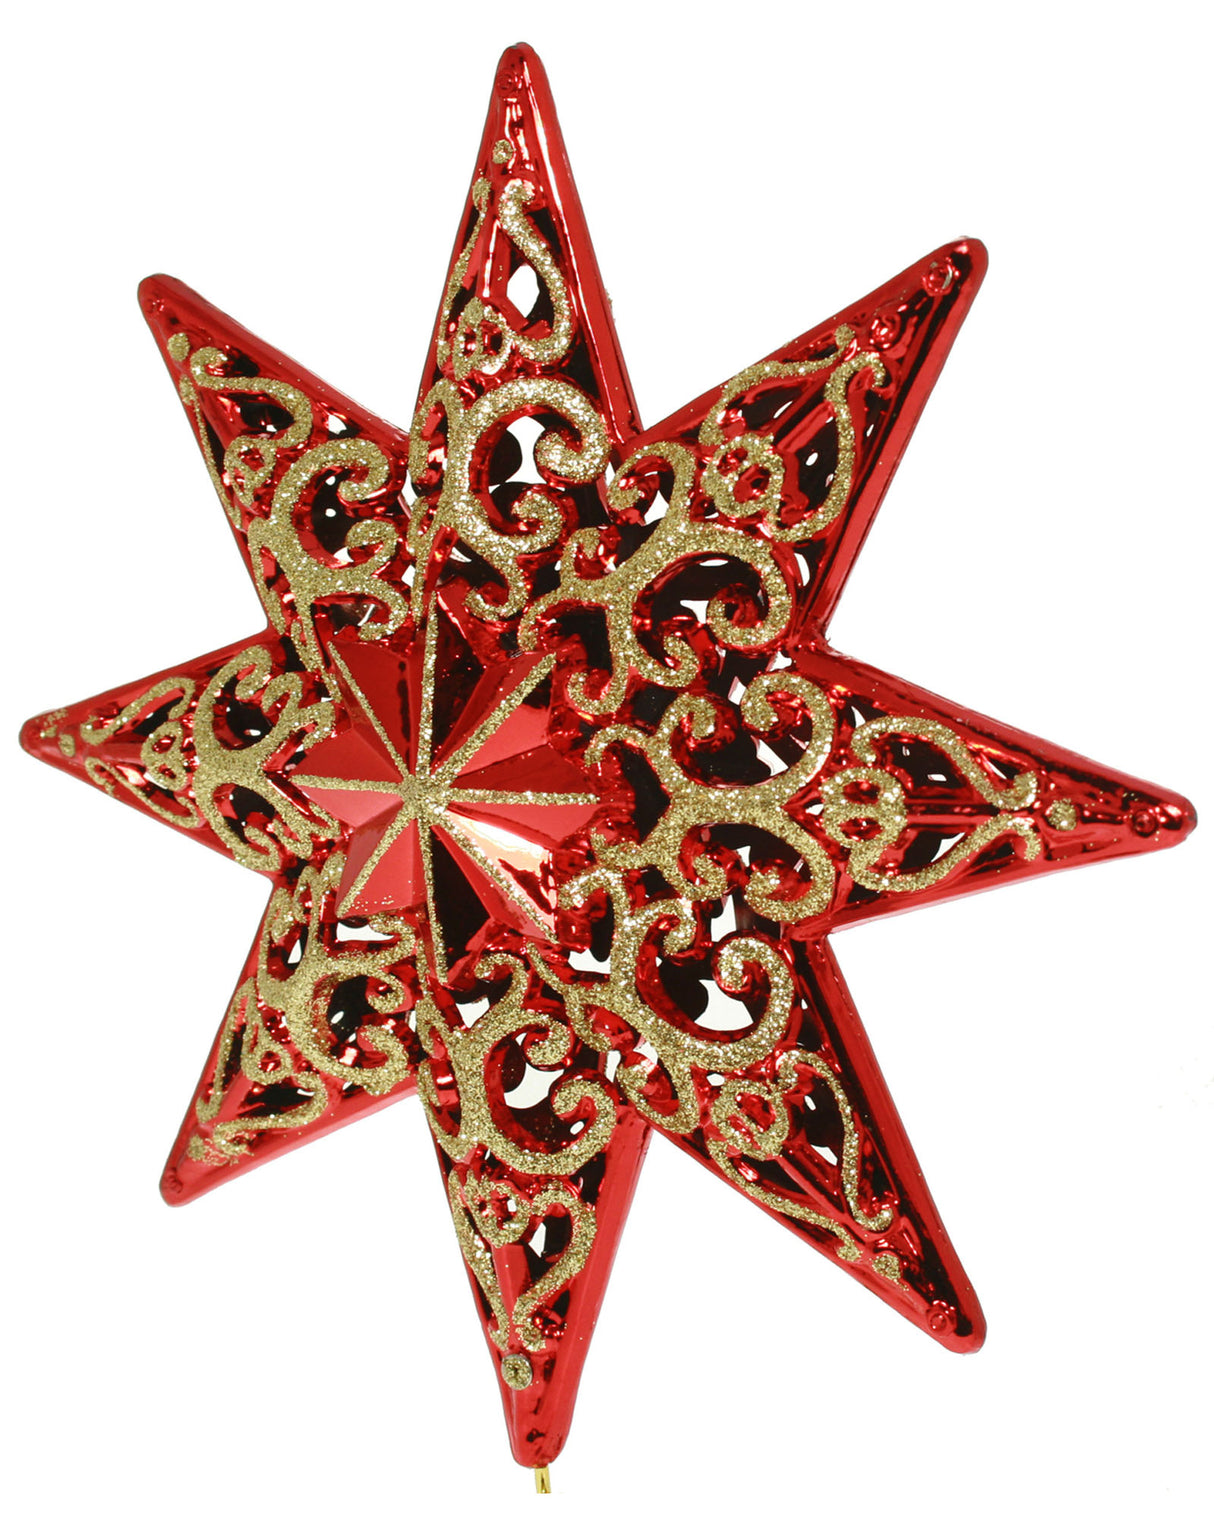 Shatterproof Deluxe Christmas Star Tree Topper with Glitter, 21 cm, Red